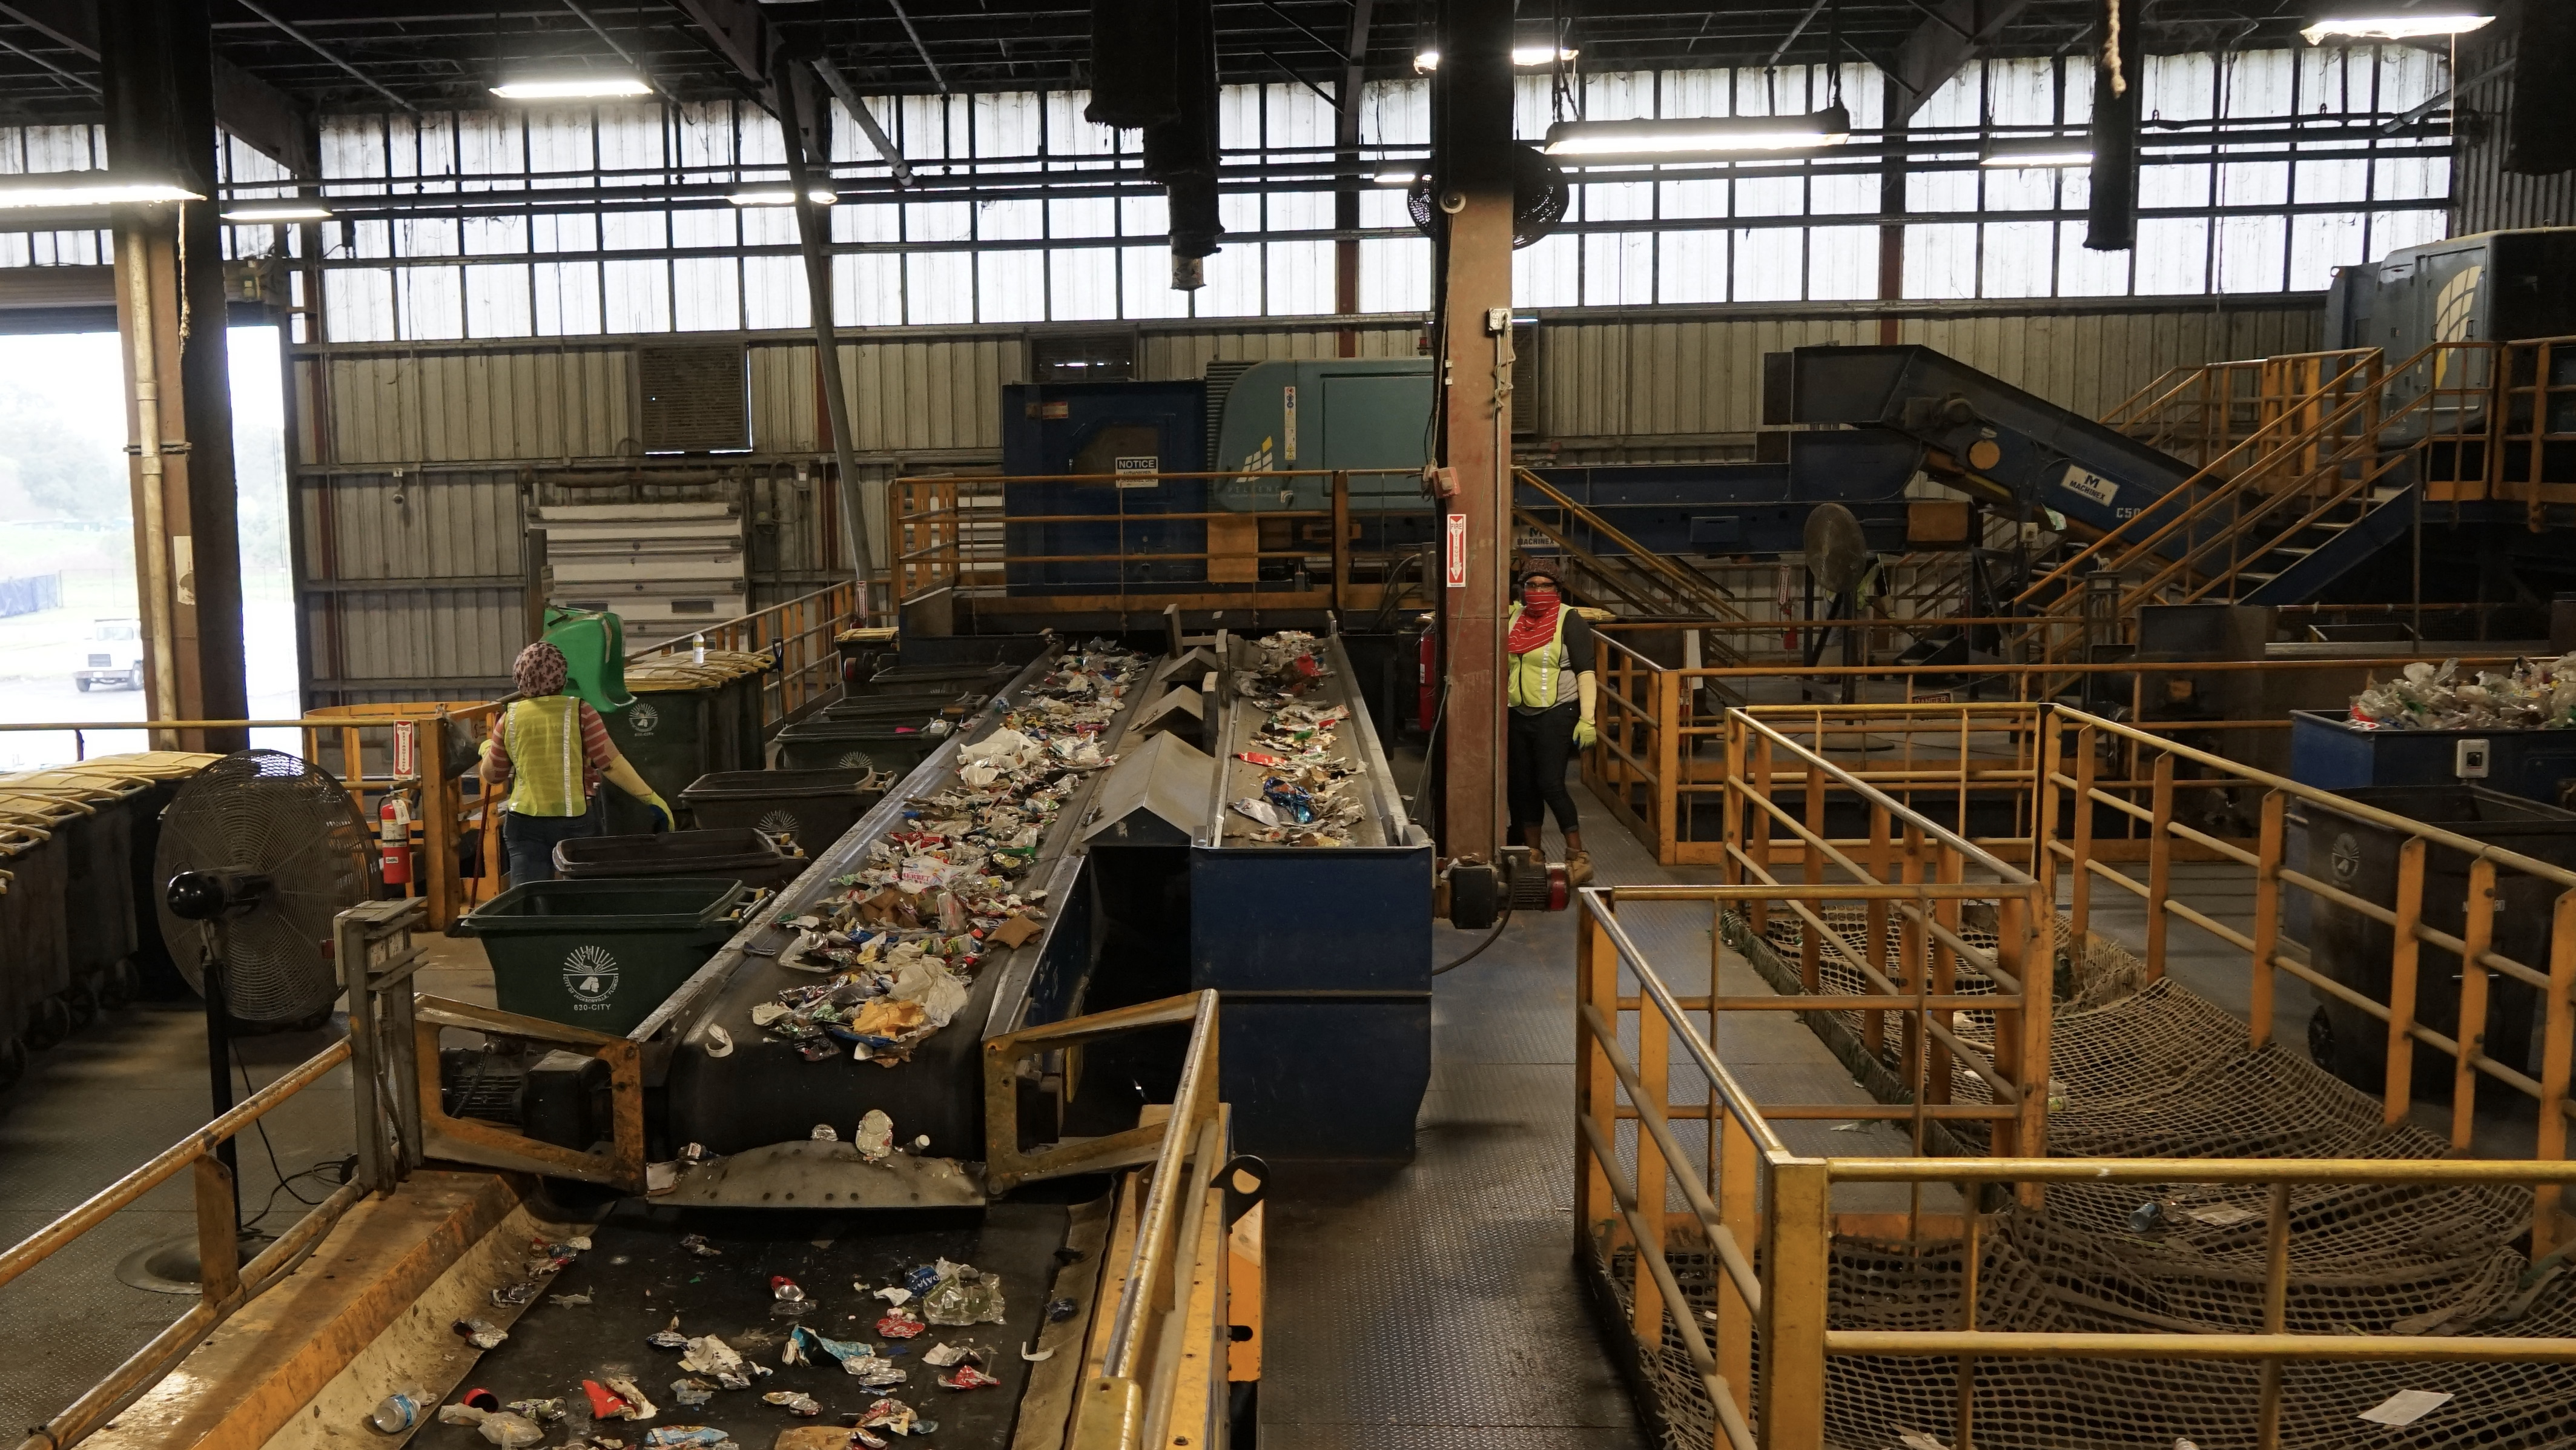 Two workers are sorting out materials at the recycling center